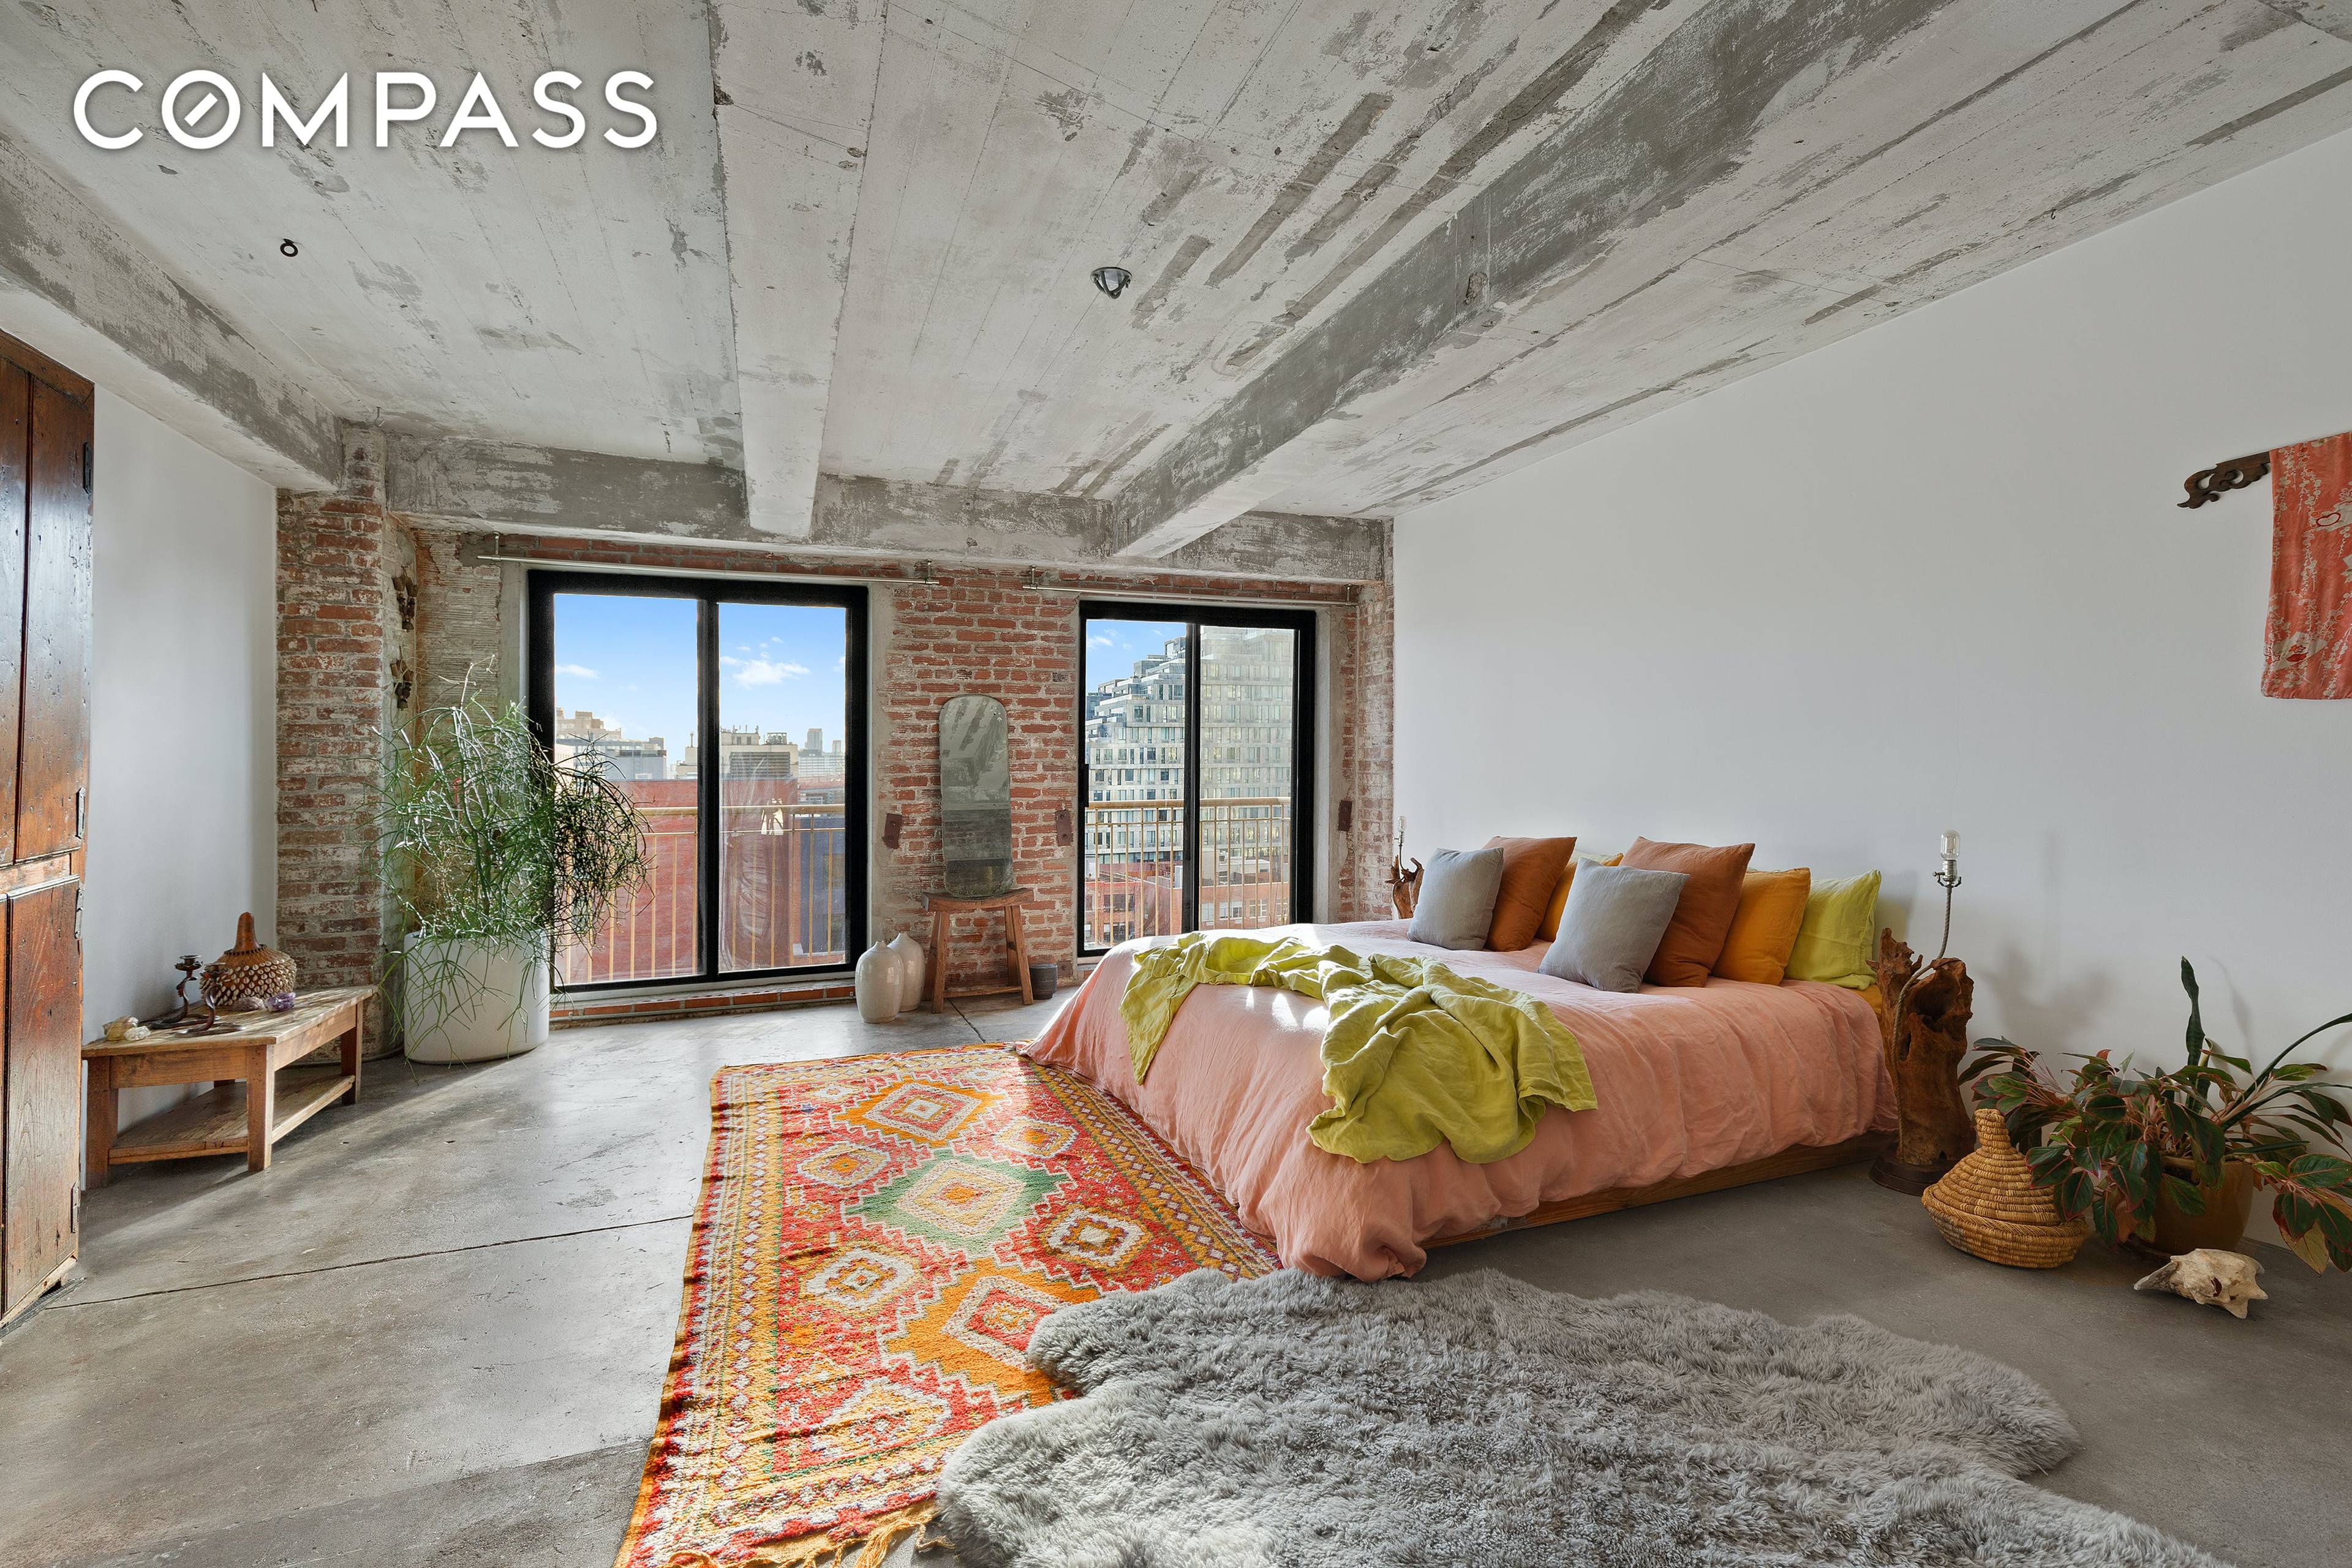 Just when you thought that there were no original loft spaces left in New York, you then found 330 Wythe Avenue in Williamsburg.